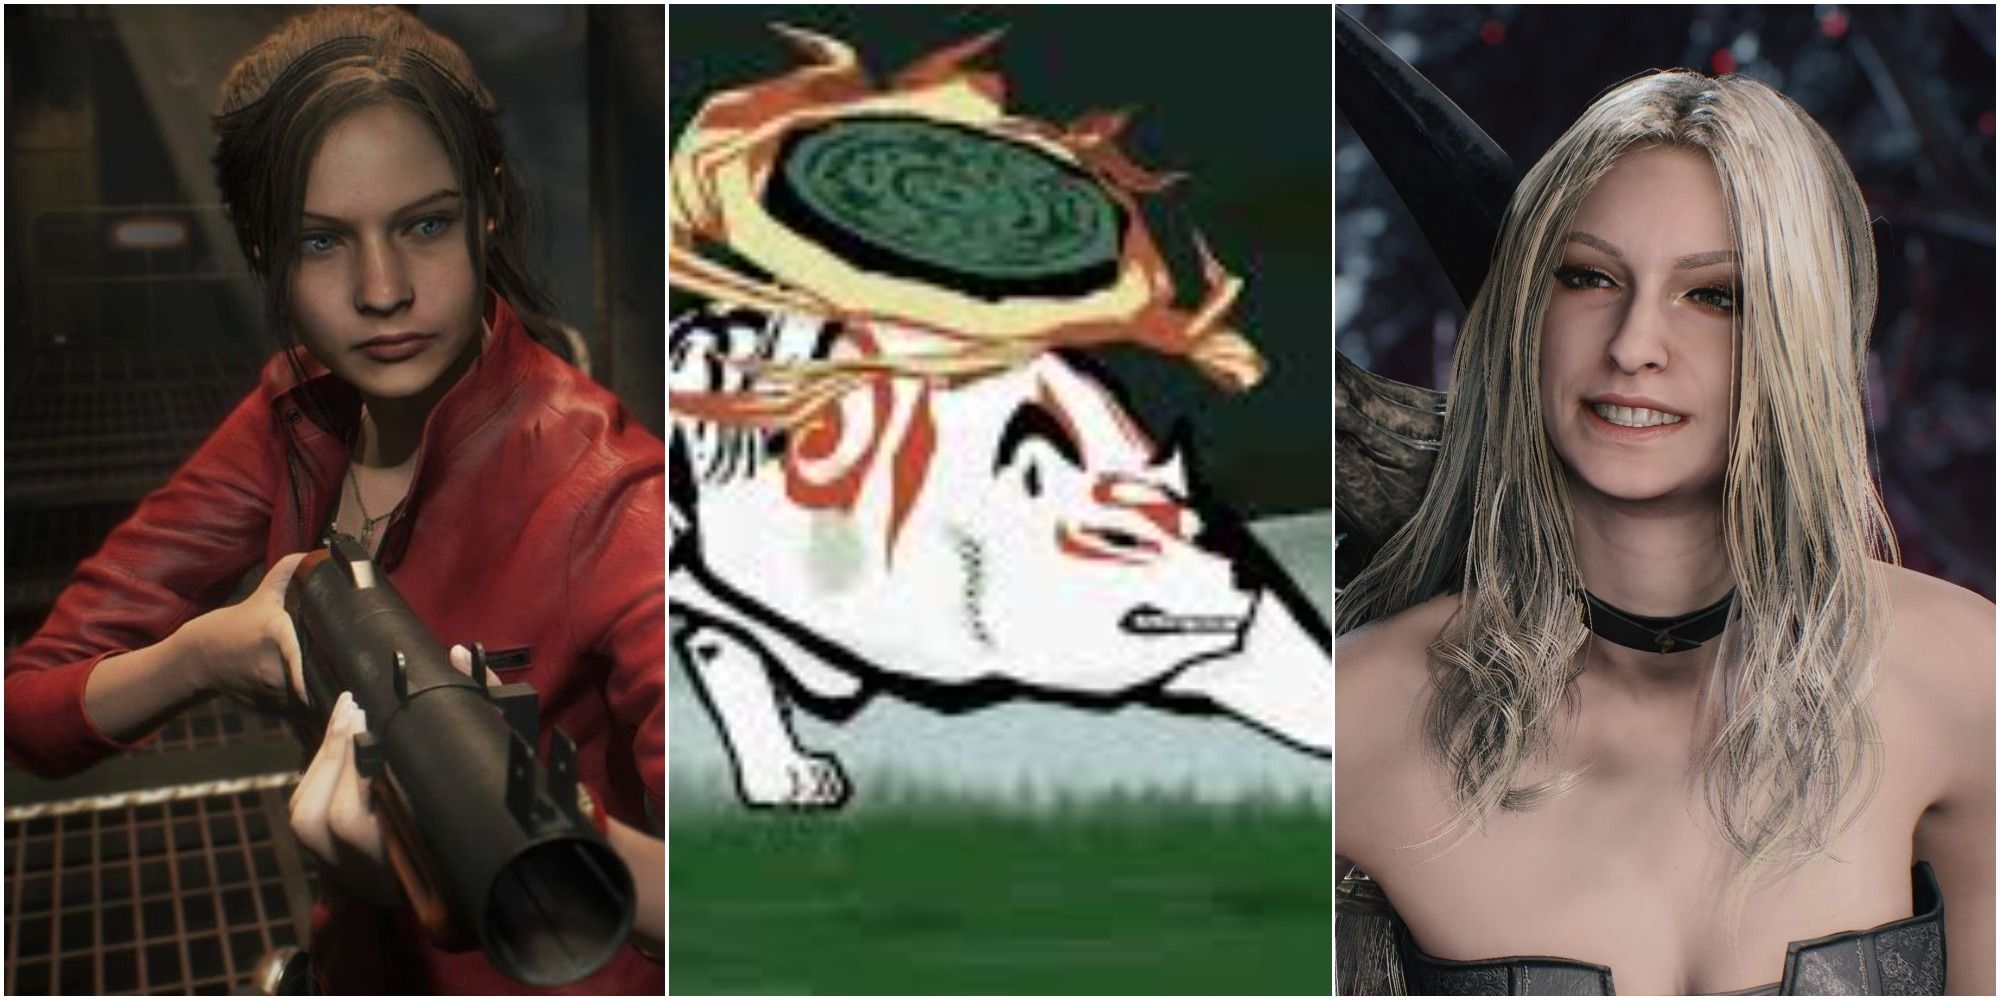 Luka's Girlfriends which are Claire from Resident Evil, Amaterasu from Okami and Trish from Devil May Cry left to right